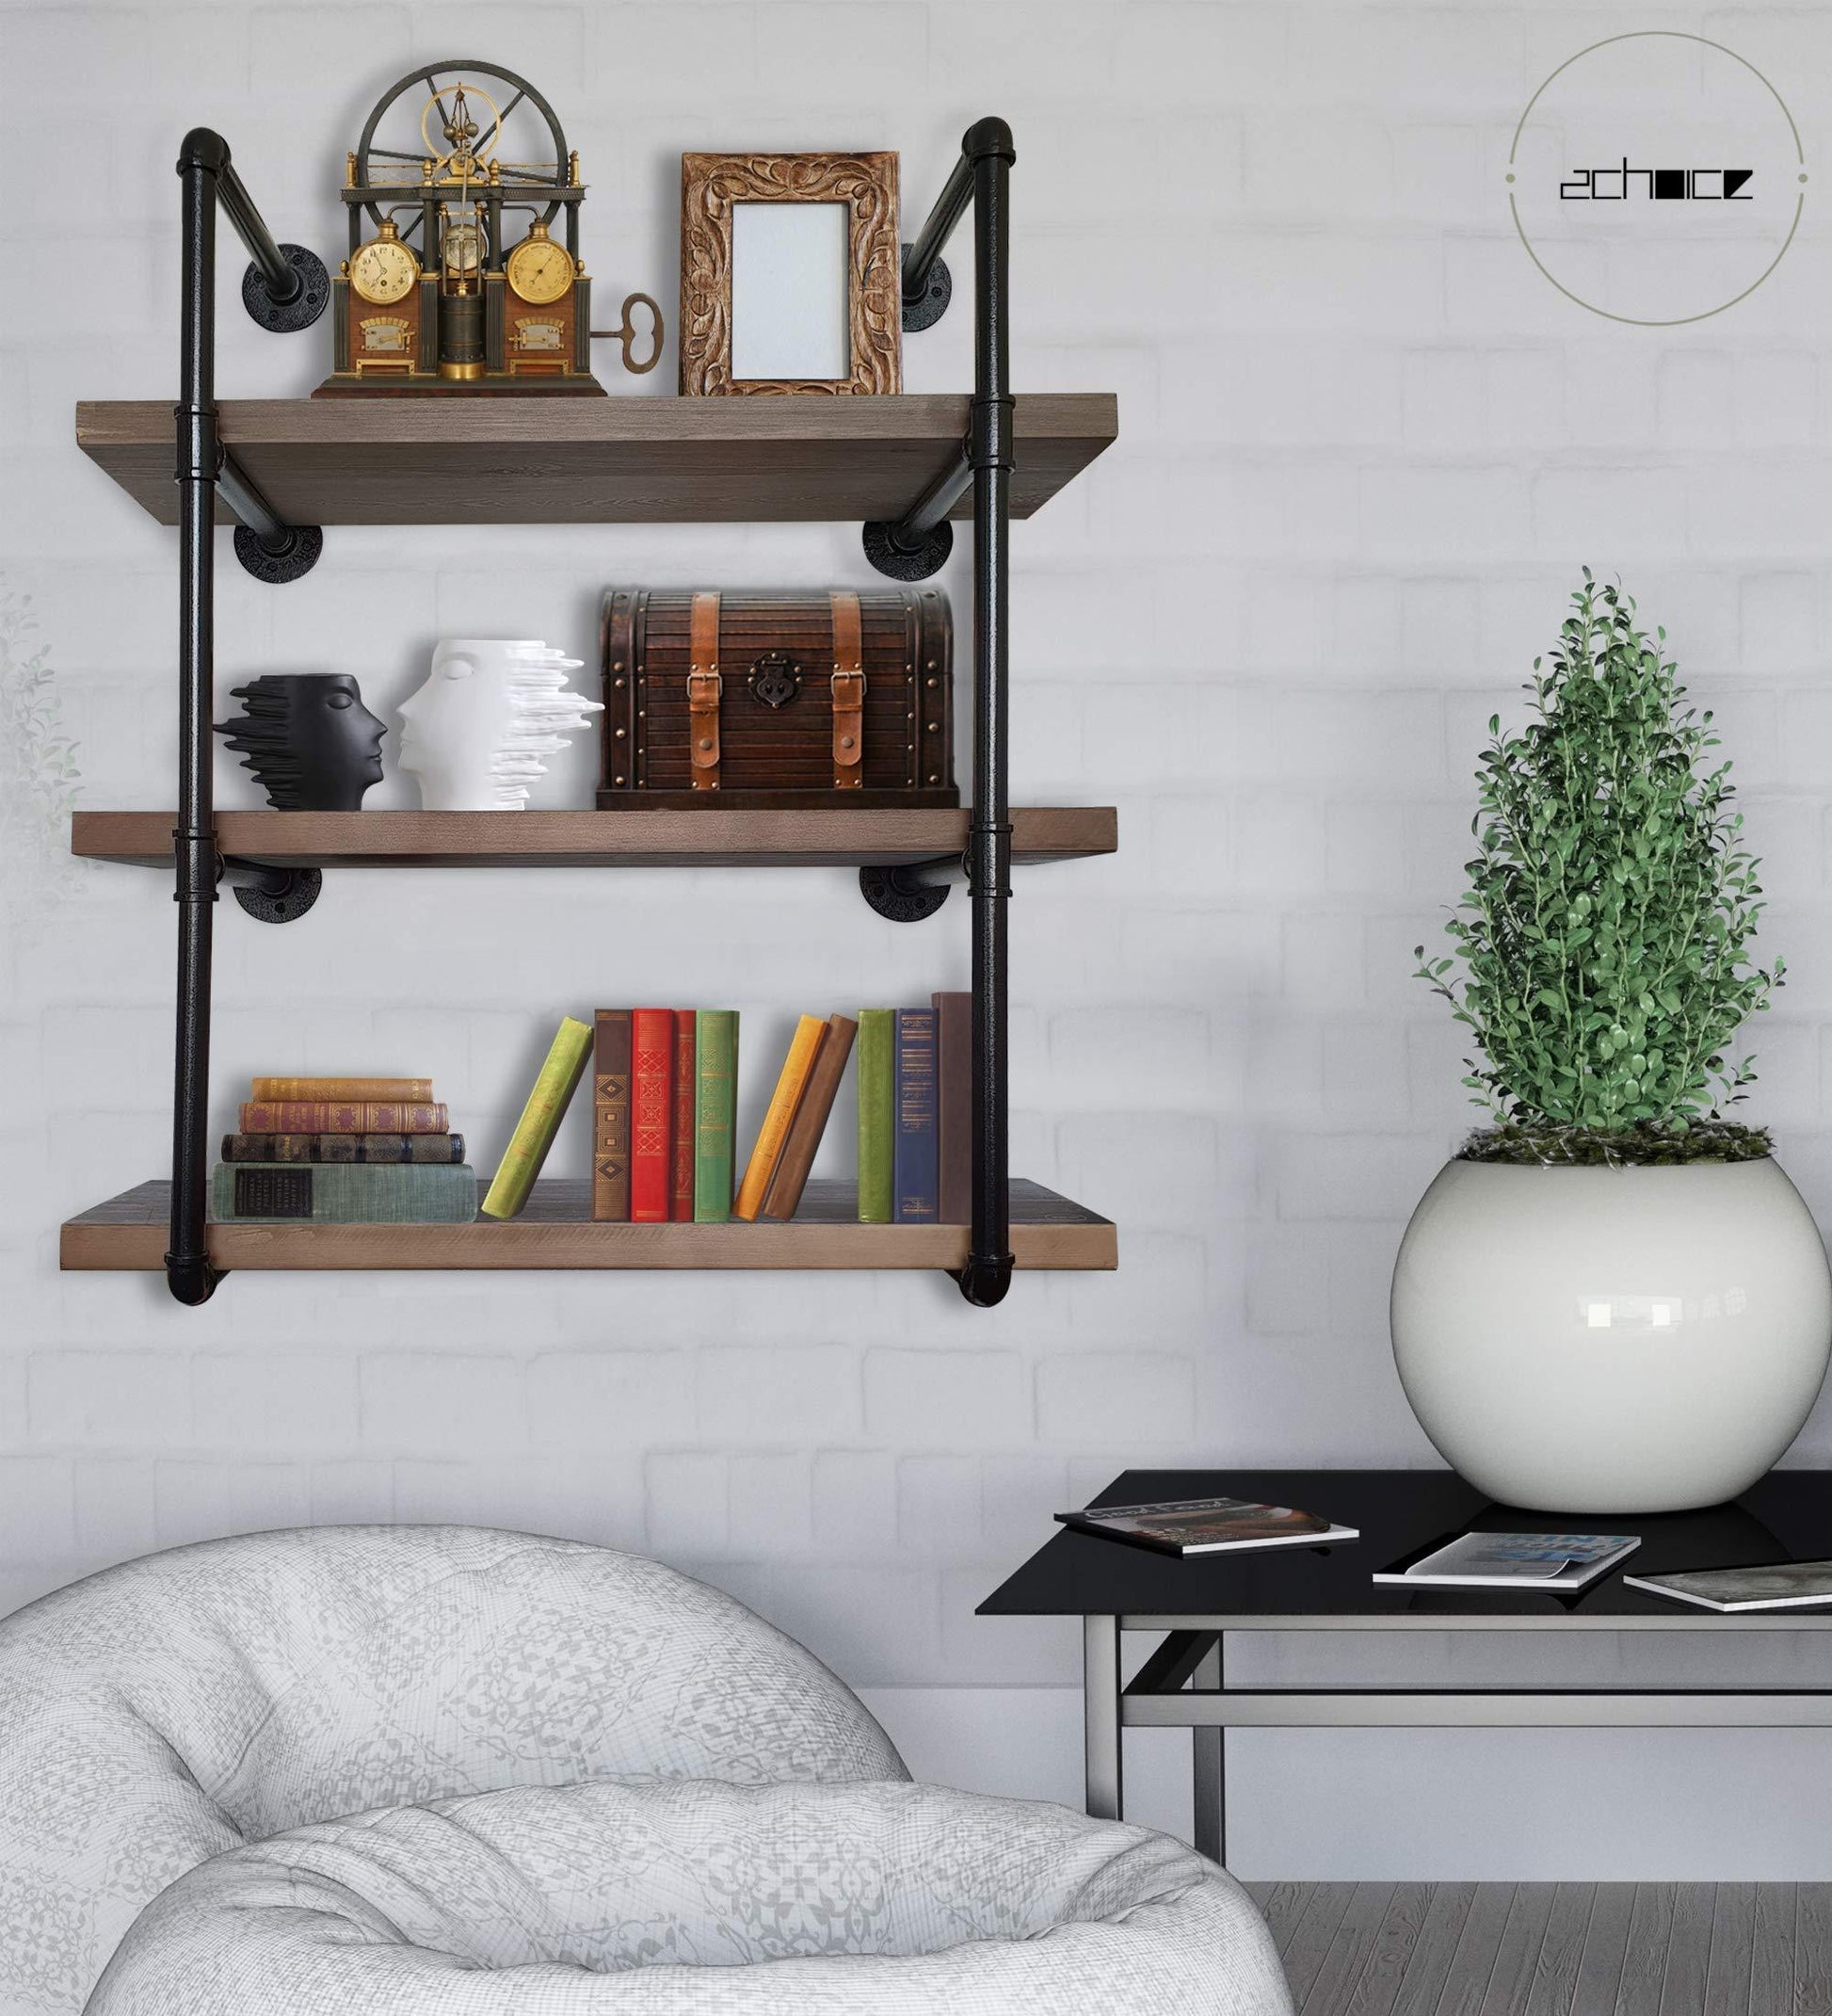 Home 2choice industrial pipe shelving rustic shelves solid canadian wood vintage sleek pipe shelves for floating bookshelf kitchen living room versatile home decor wall mounted storage 3 tier